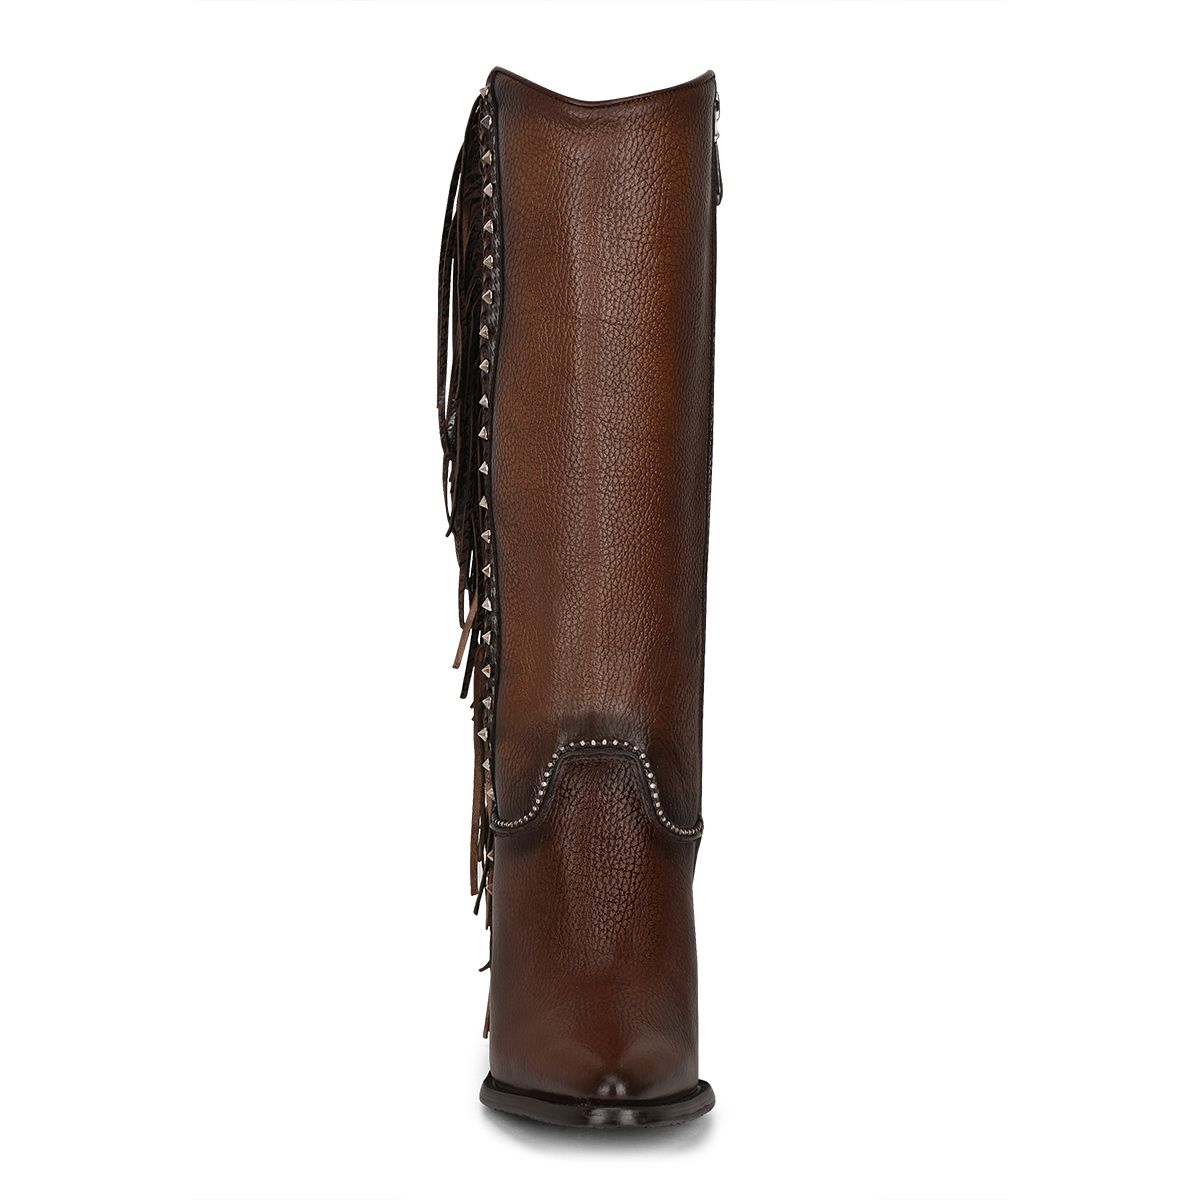 4Q03RS - Cuadra brown western cowgirl cowhide leather strapped boots for women-Kuet.us